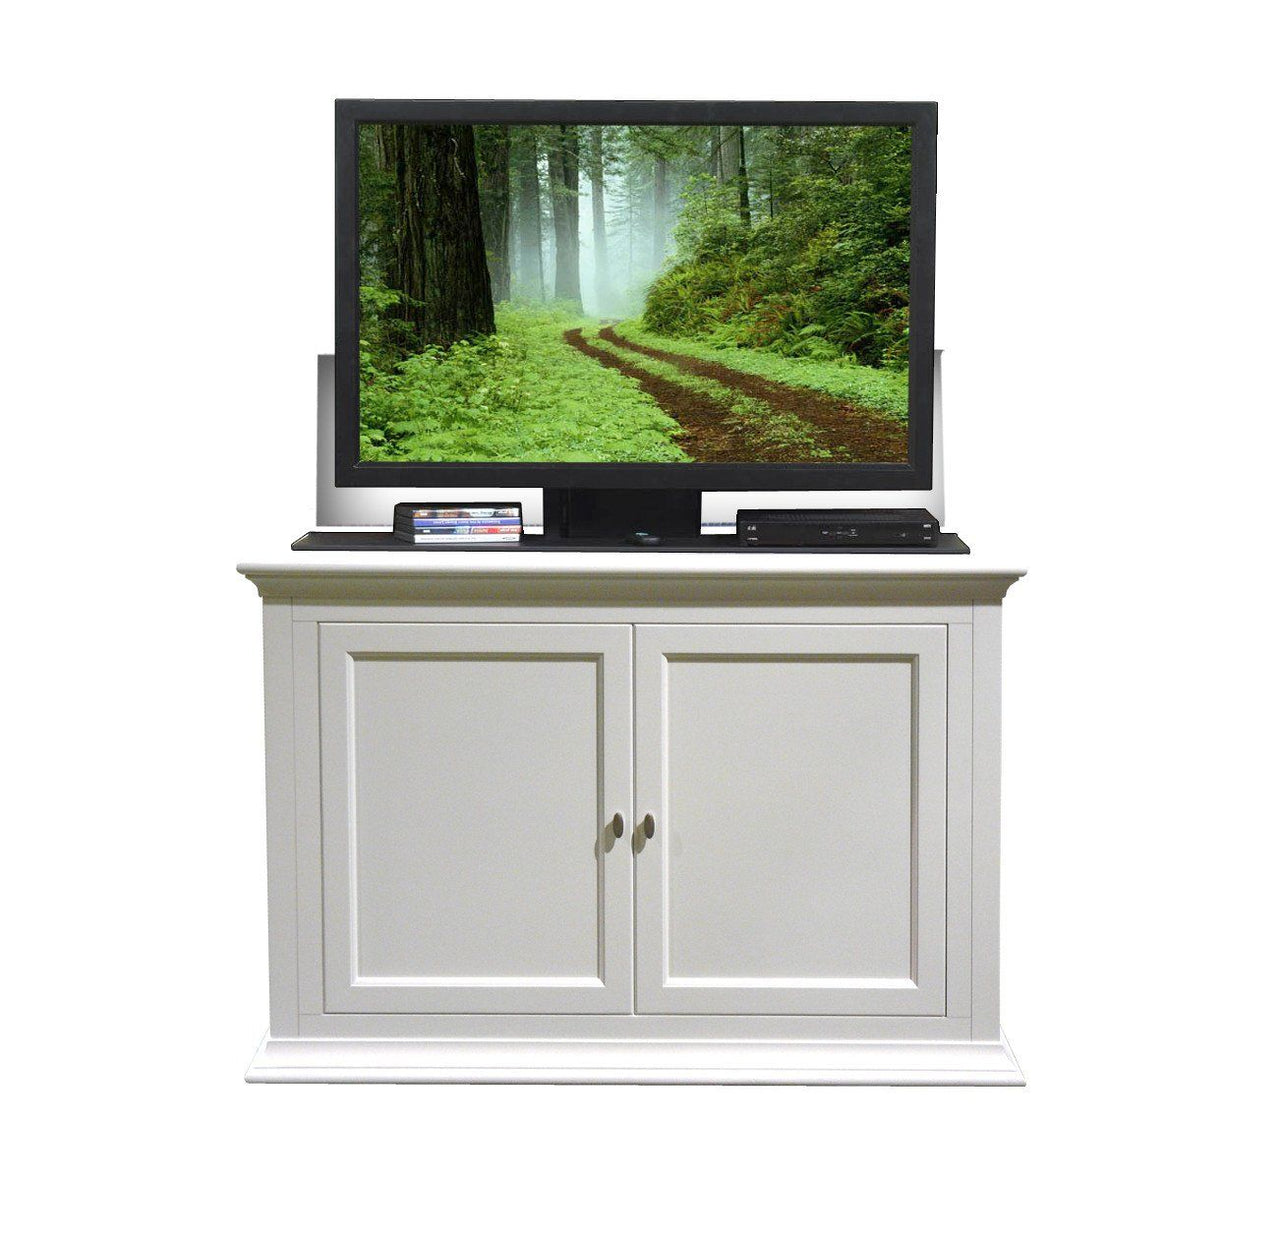 Touchstone Seaford Tv Lift Cabinets For Up To 46” Flat Screen Tv’S Tv Lift Cabinets Touchstone 